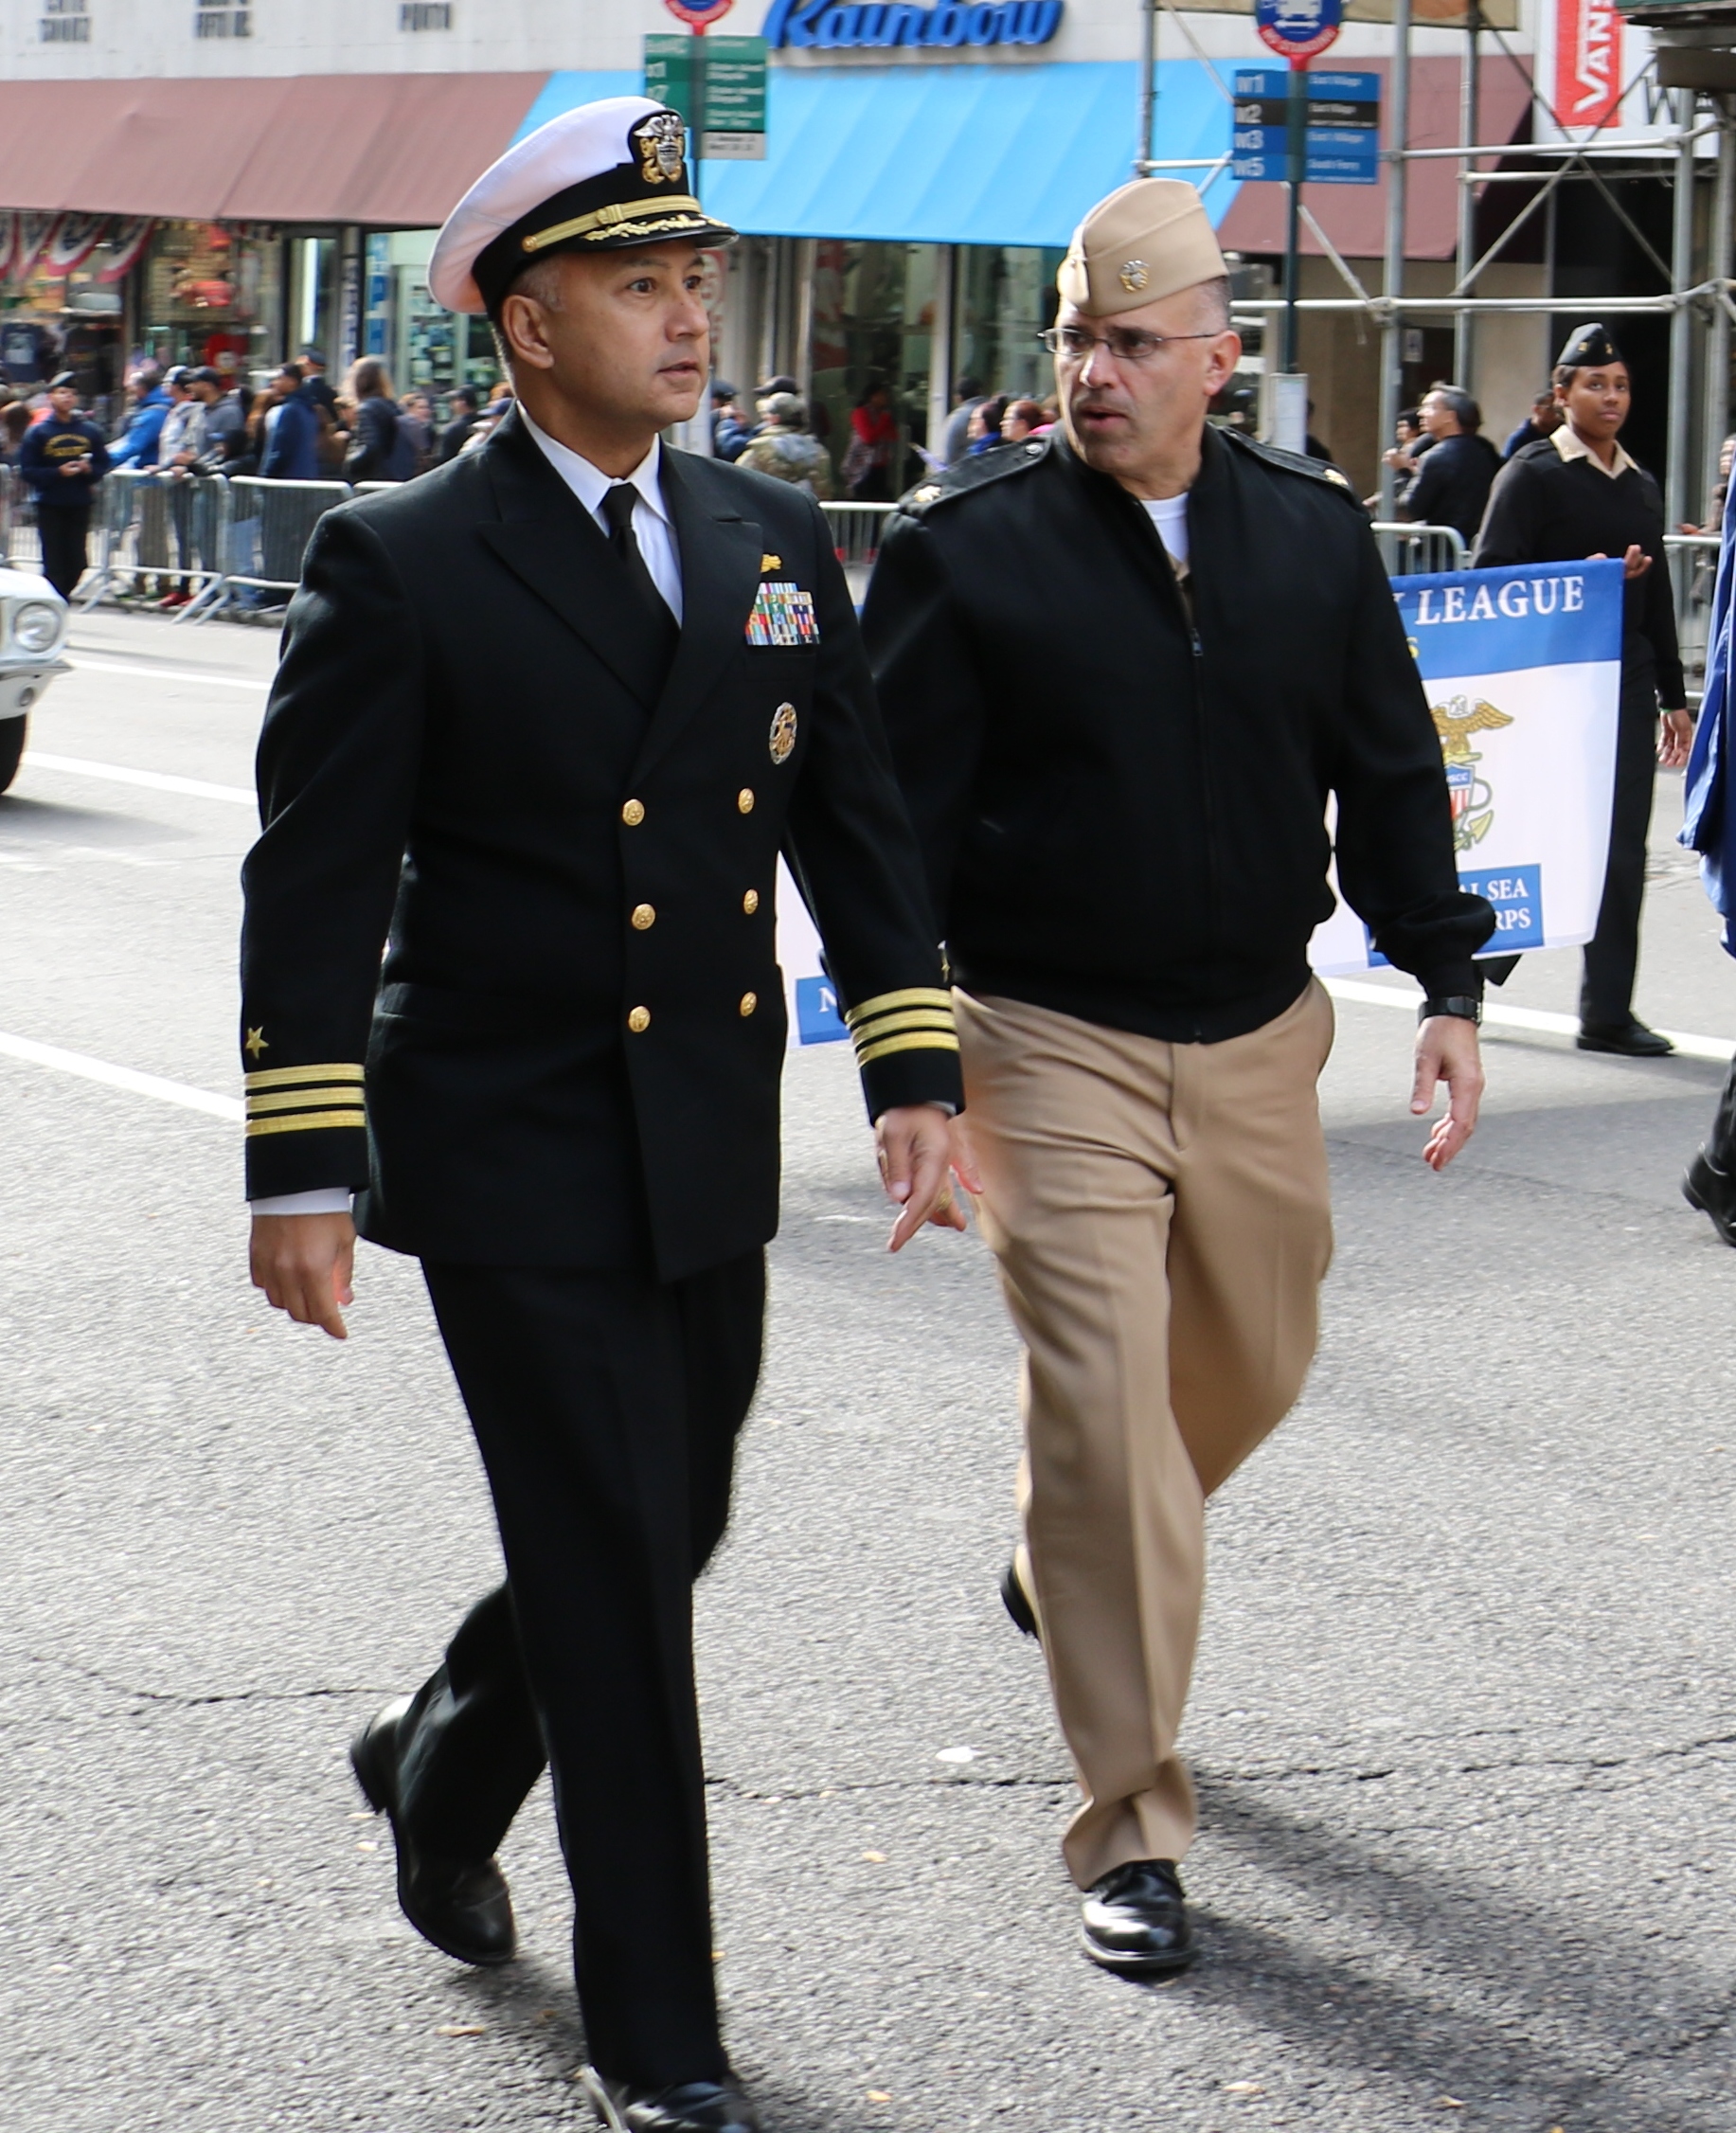 Parade_Two_officers_marching_IMG0287_crop2.JPG